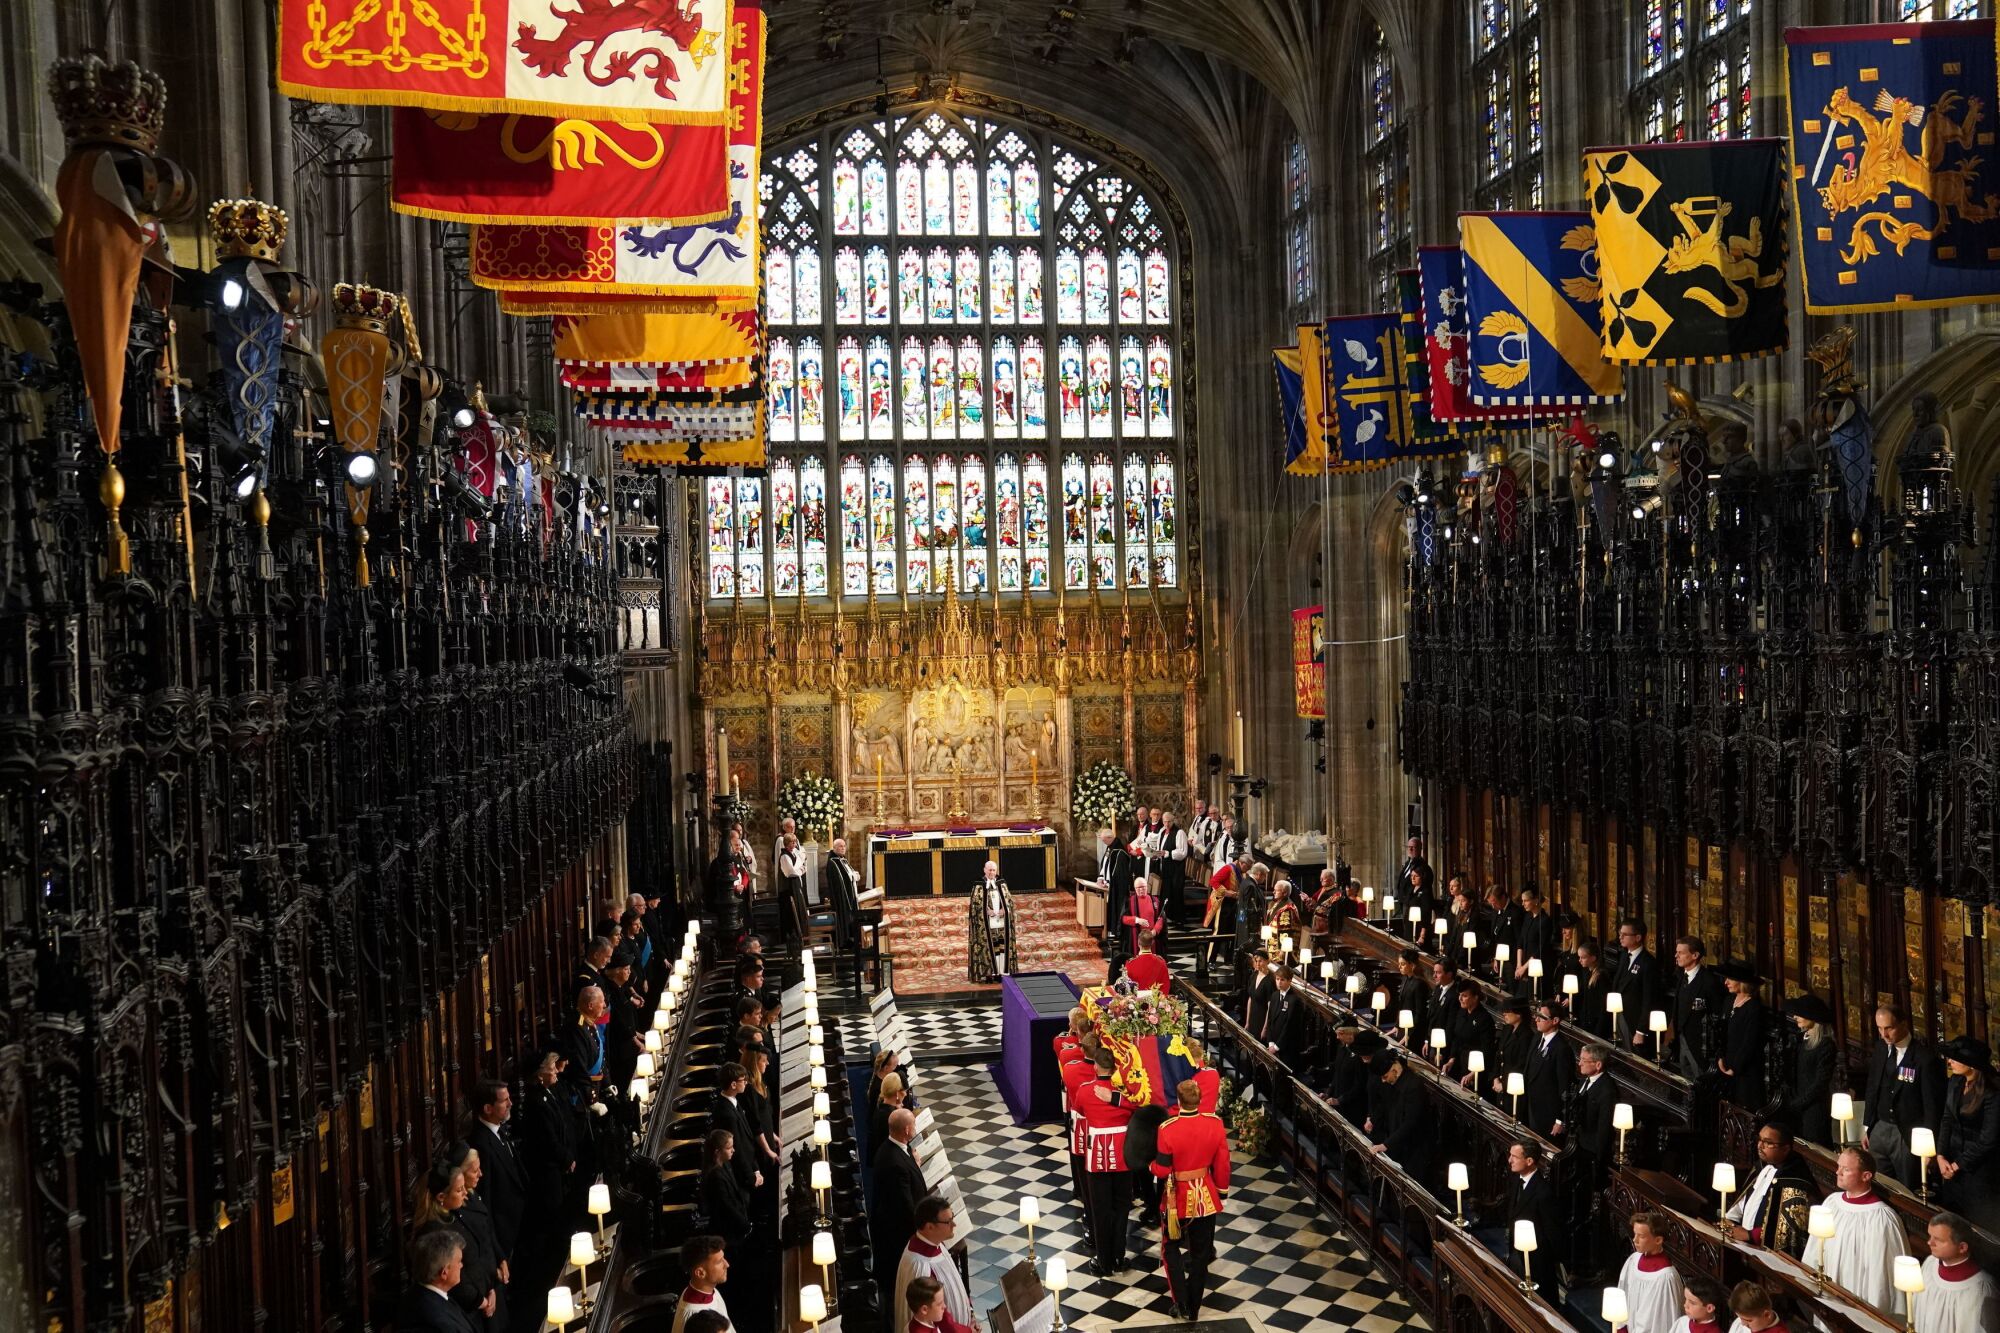 Uniformed pallbearers carry a casket through St. George's Chapel as attendees stand on pews on either side of the aisle.